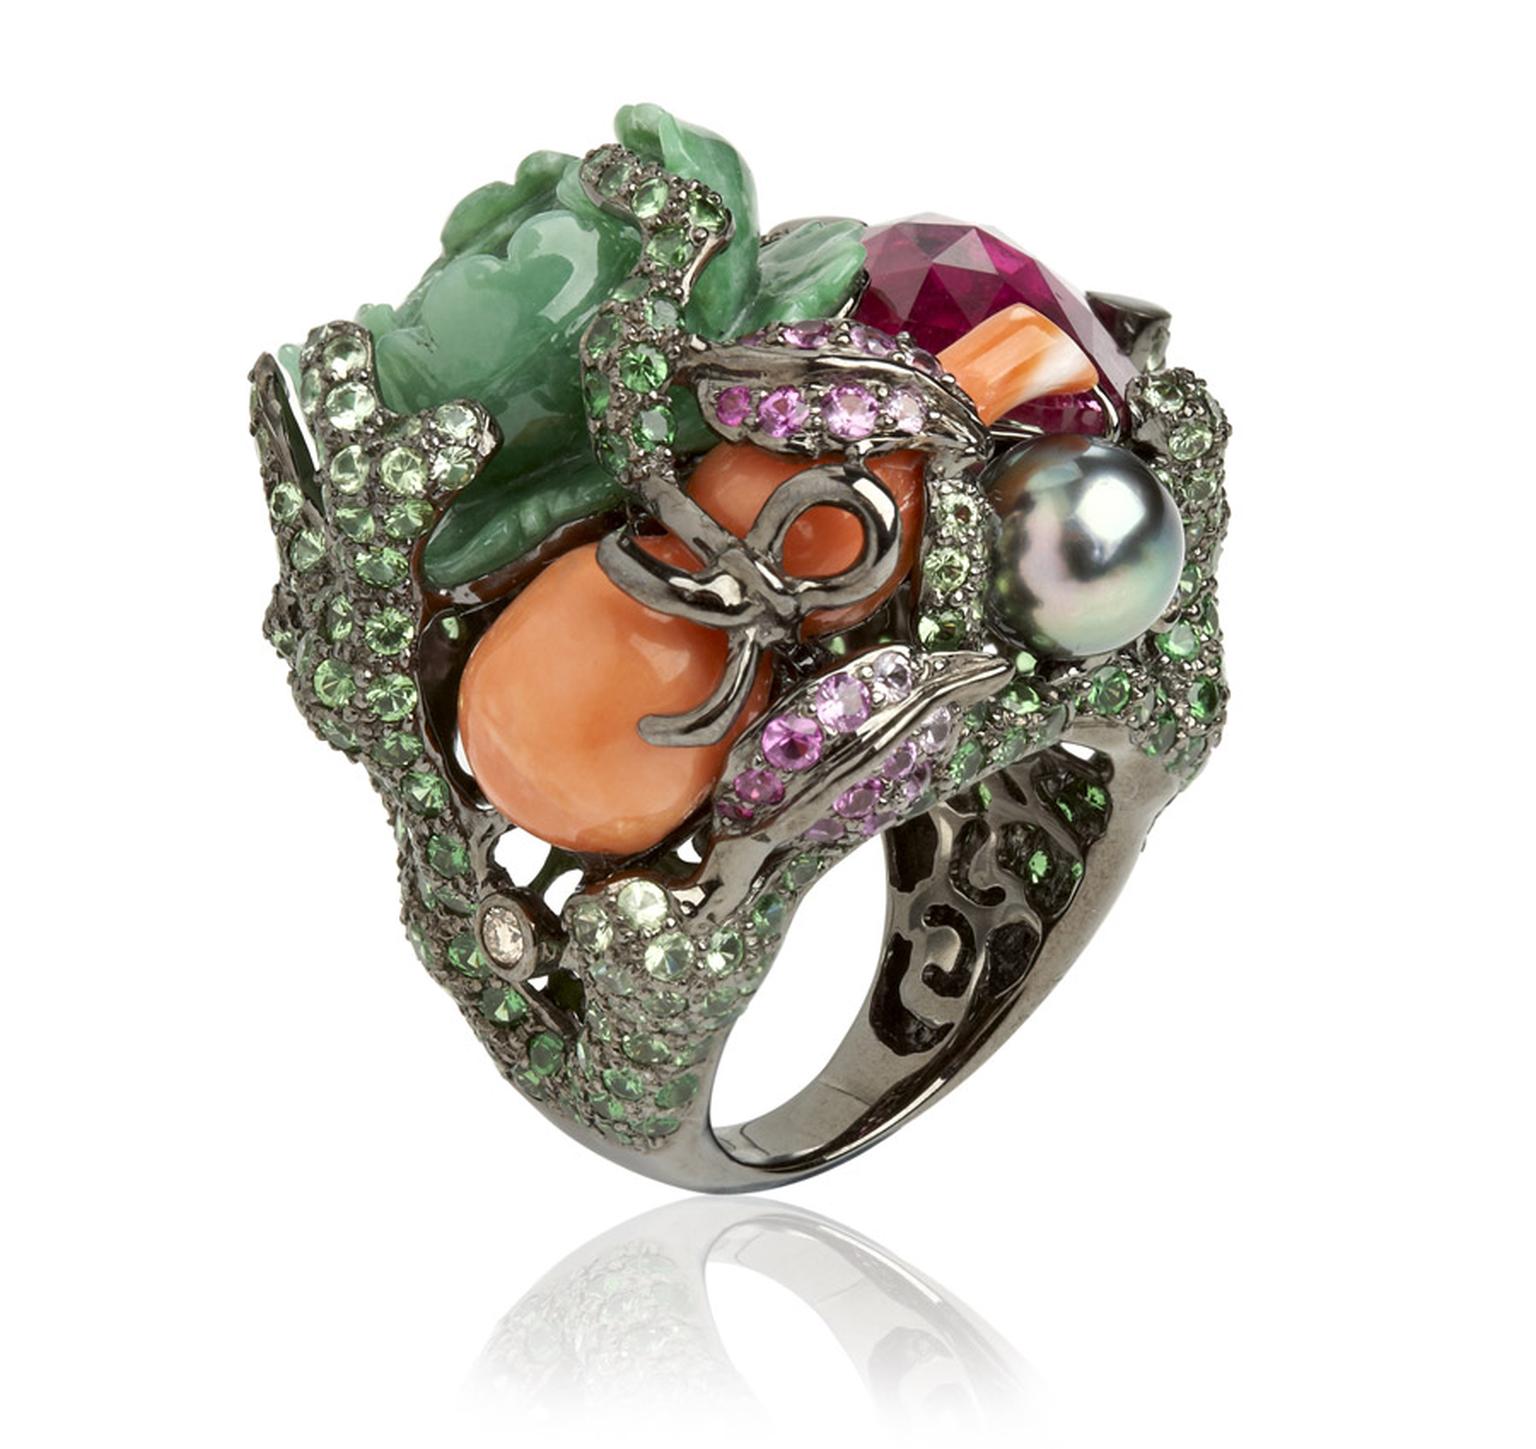 Wendy-Yue-Fantasie-18ct-white-gold--diamond-garnet-sapphire-pearl-coral-and-jade-Jugle-Jumble-ring-By-Wendy--Yue-for-Annoushka-.jpg